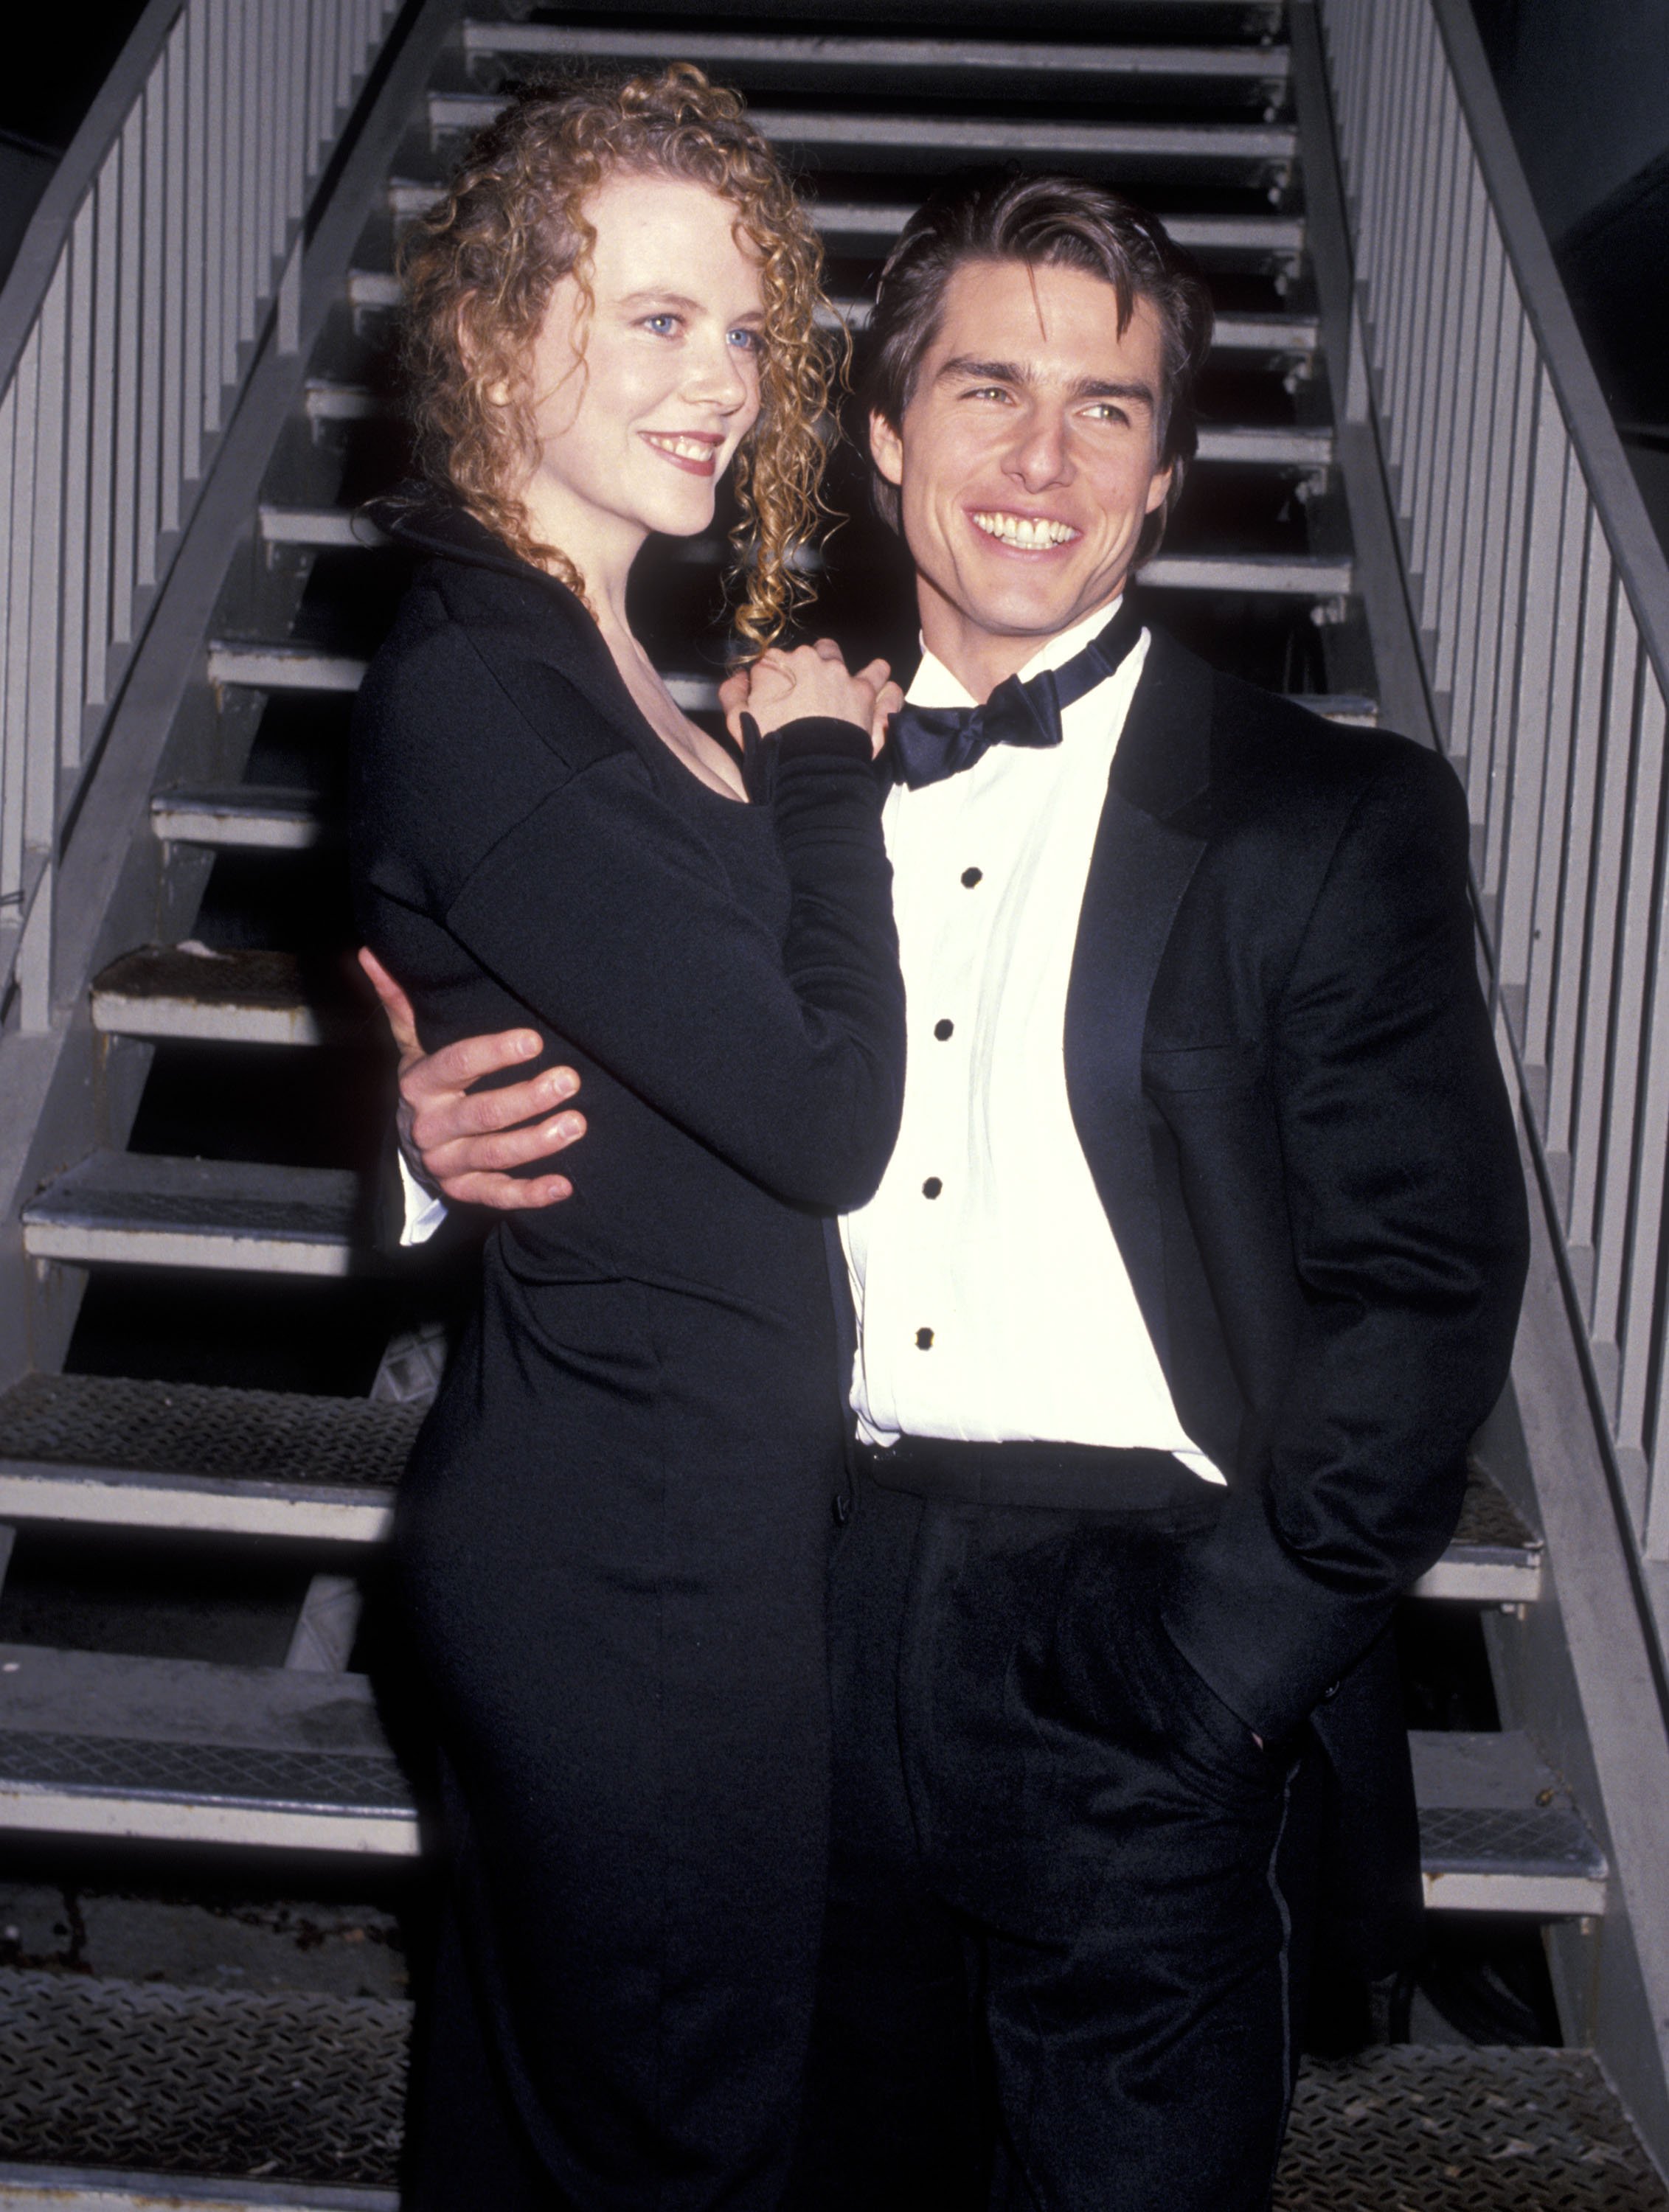 Nicole Kidman and actor Tom Cruise attend the 19th Annual American Film Institute (AFI) Lifetime Achievement Award Salute to Kirk Douglas on March 7, 1991 | Photo: Getty Images